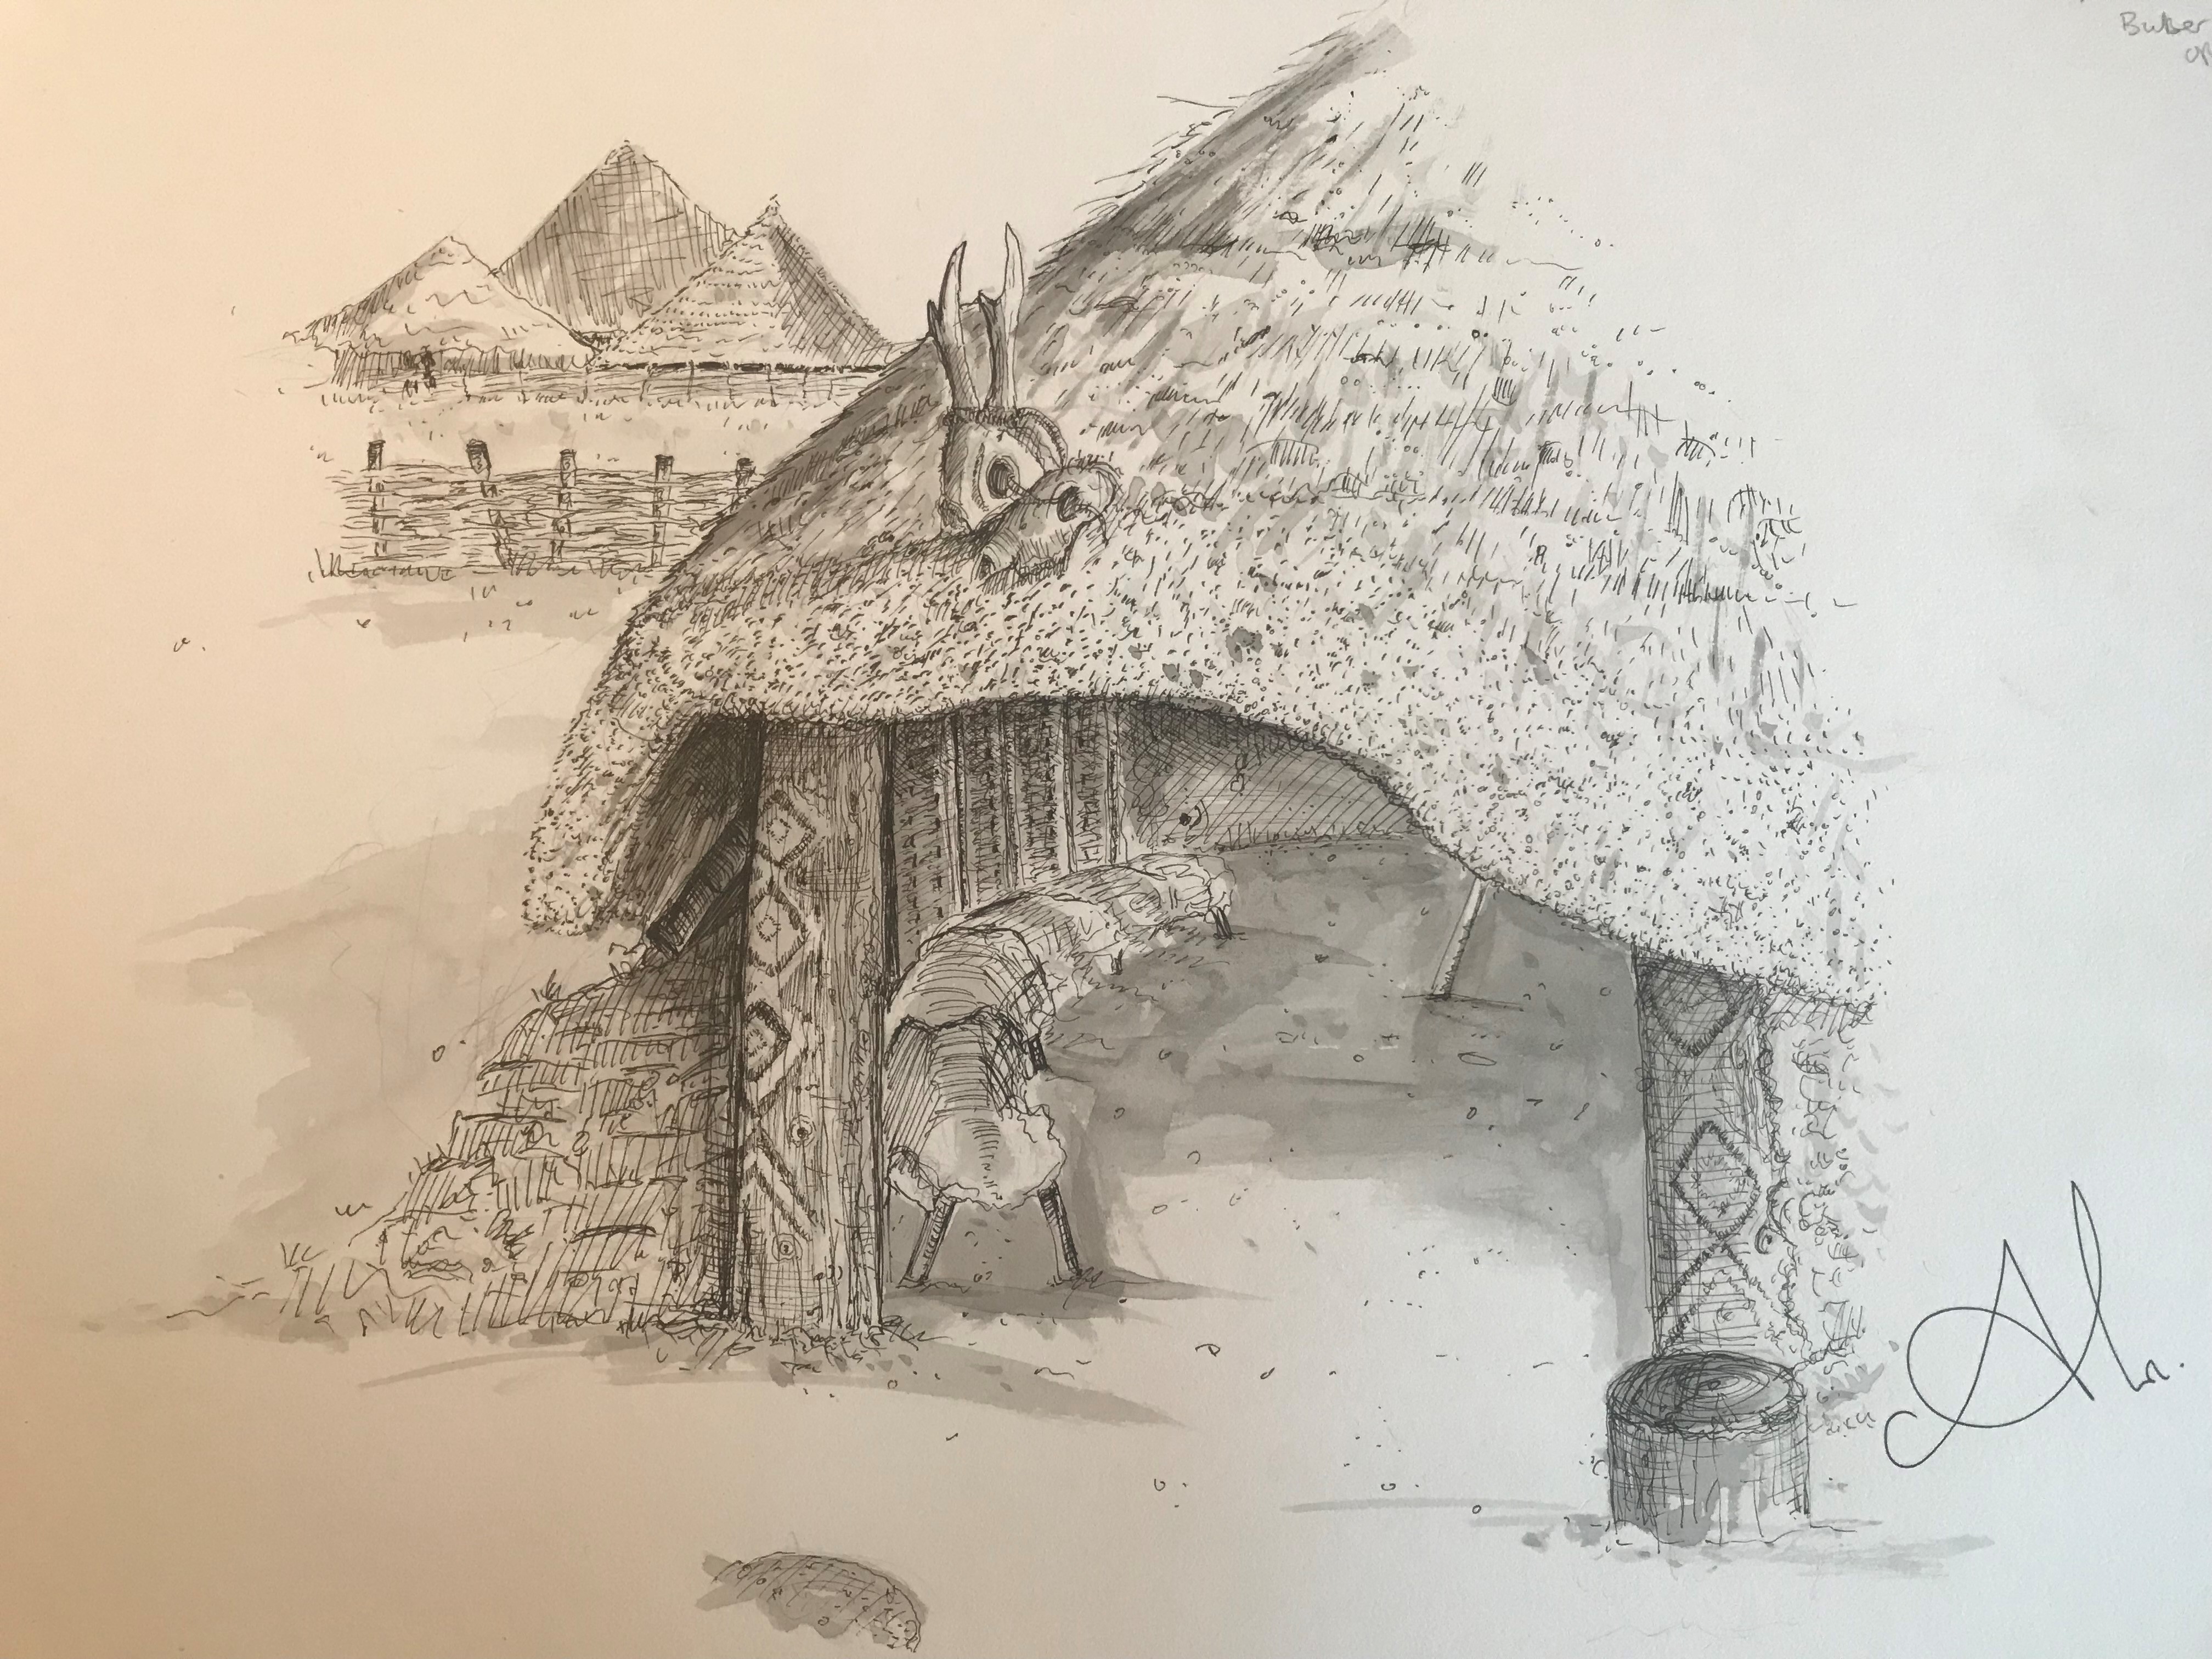 A drawing of a building with a thatched roof